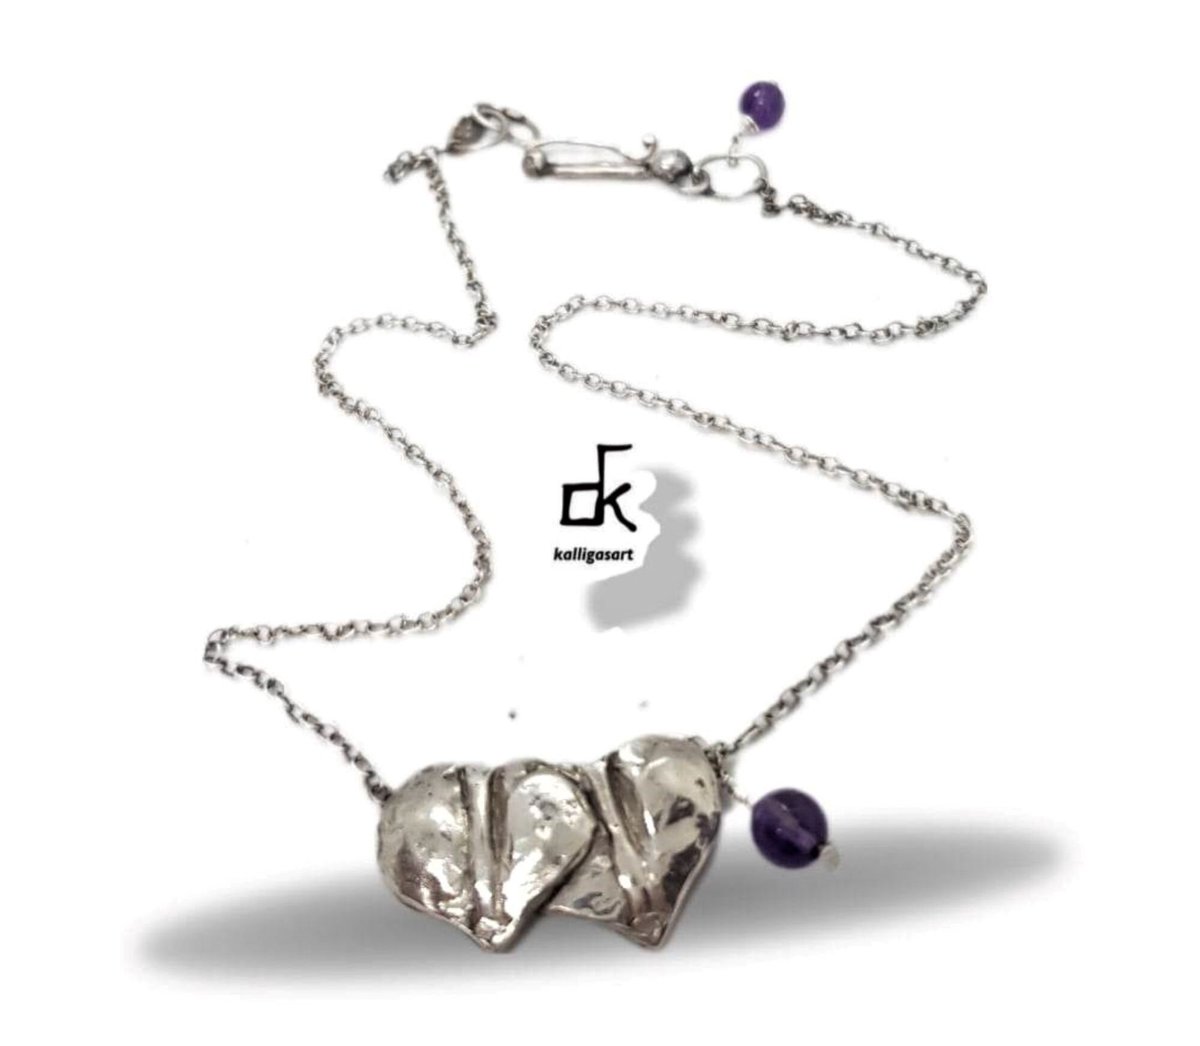 my #etsy shop: Silver 925 heart Necklace with Amethyst gemstone, Handmade Sculptural by Ancient Technique, Valentines art jewel, perfect gift for her etsy.me/3DRLiET #silvernecklace #lovefriendship #valentinejewelry #giftforher #gemstonejewelry #fashionjewelry